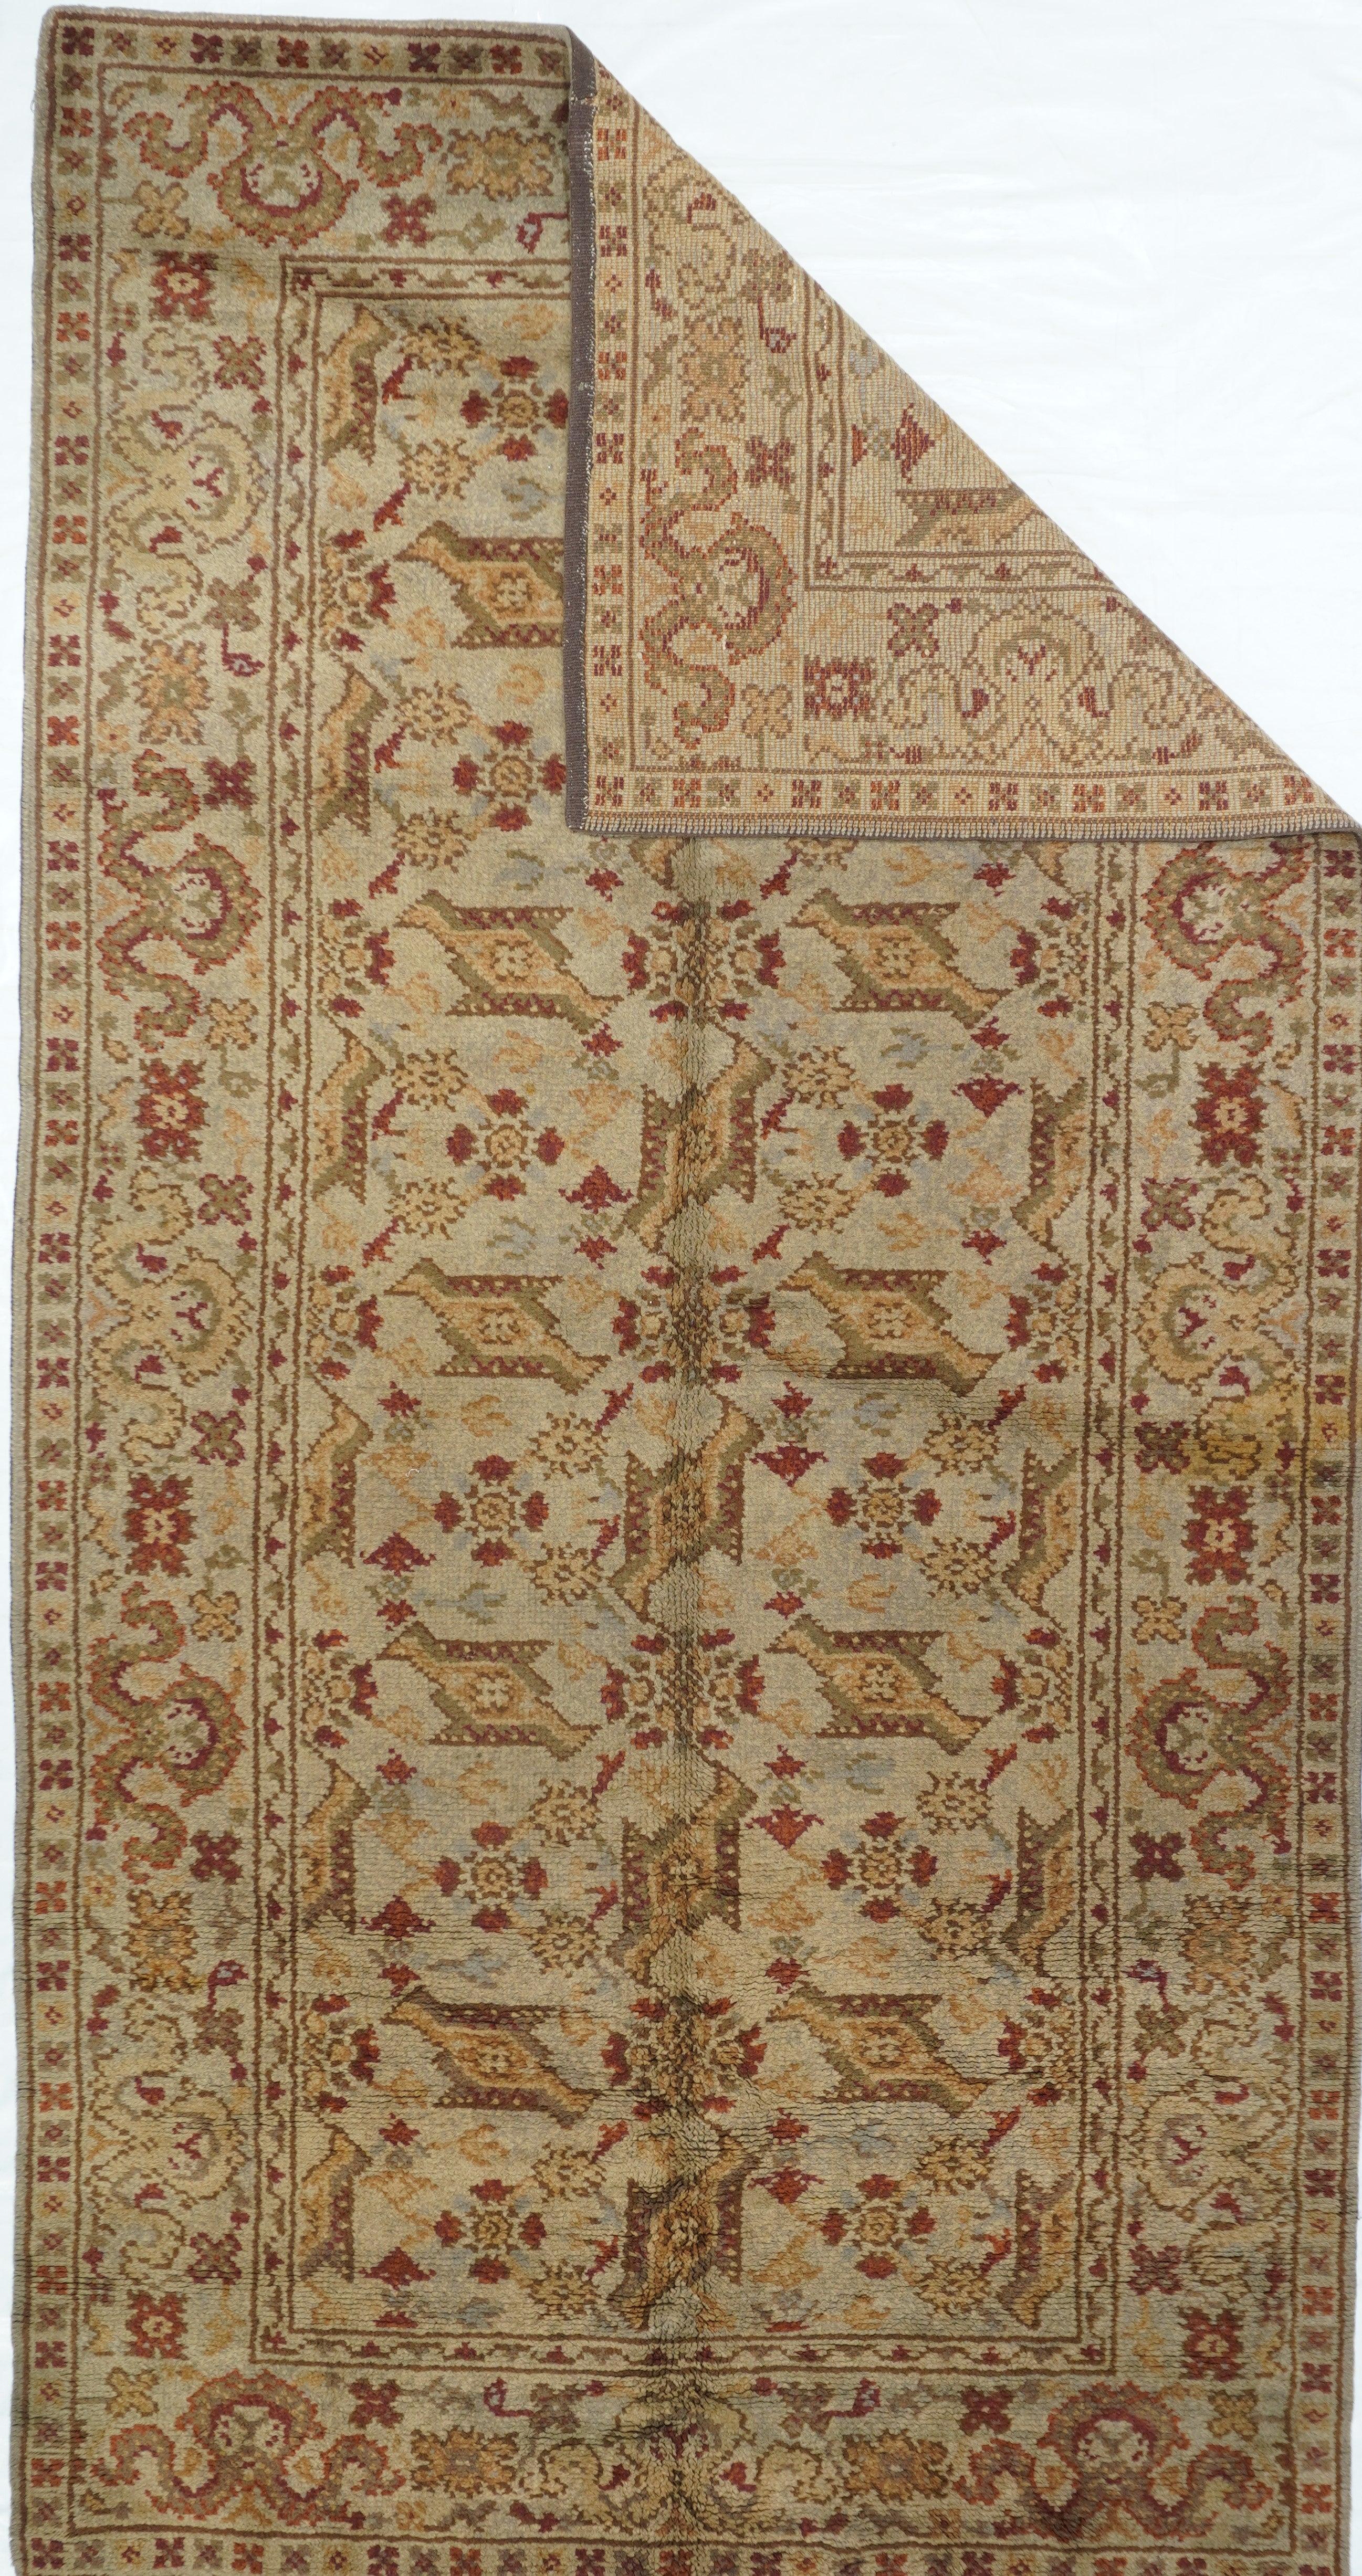 This modern copy of a 17th century Oushak “bird carpet” shows two columns of “bird” leaves around a central run of rosettes, on a straw-sand ground. Straw-sand border with cloud bands and rosettes. The “bird” pattern never really gores out of style